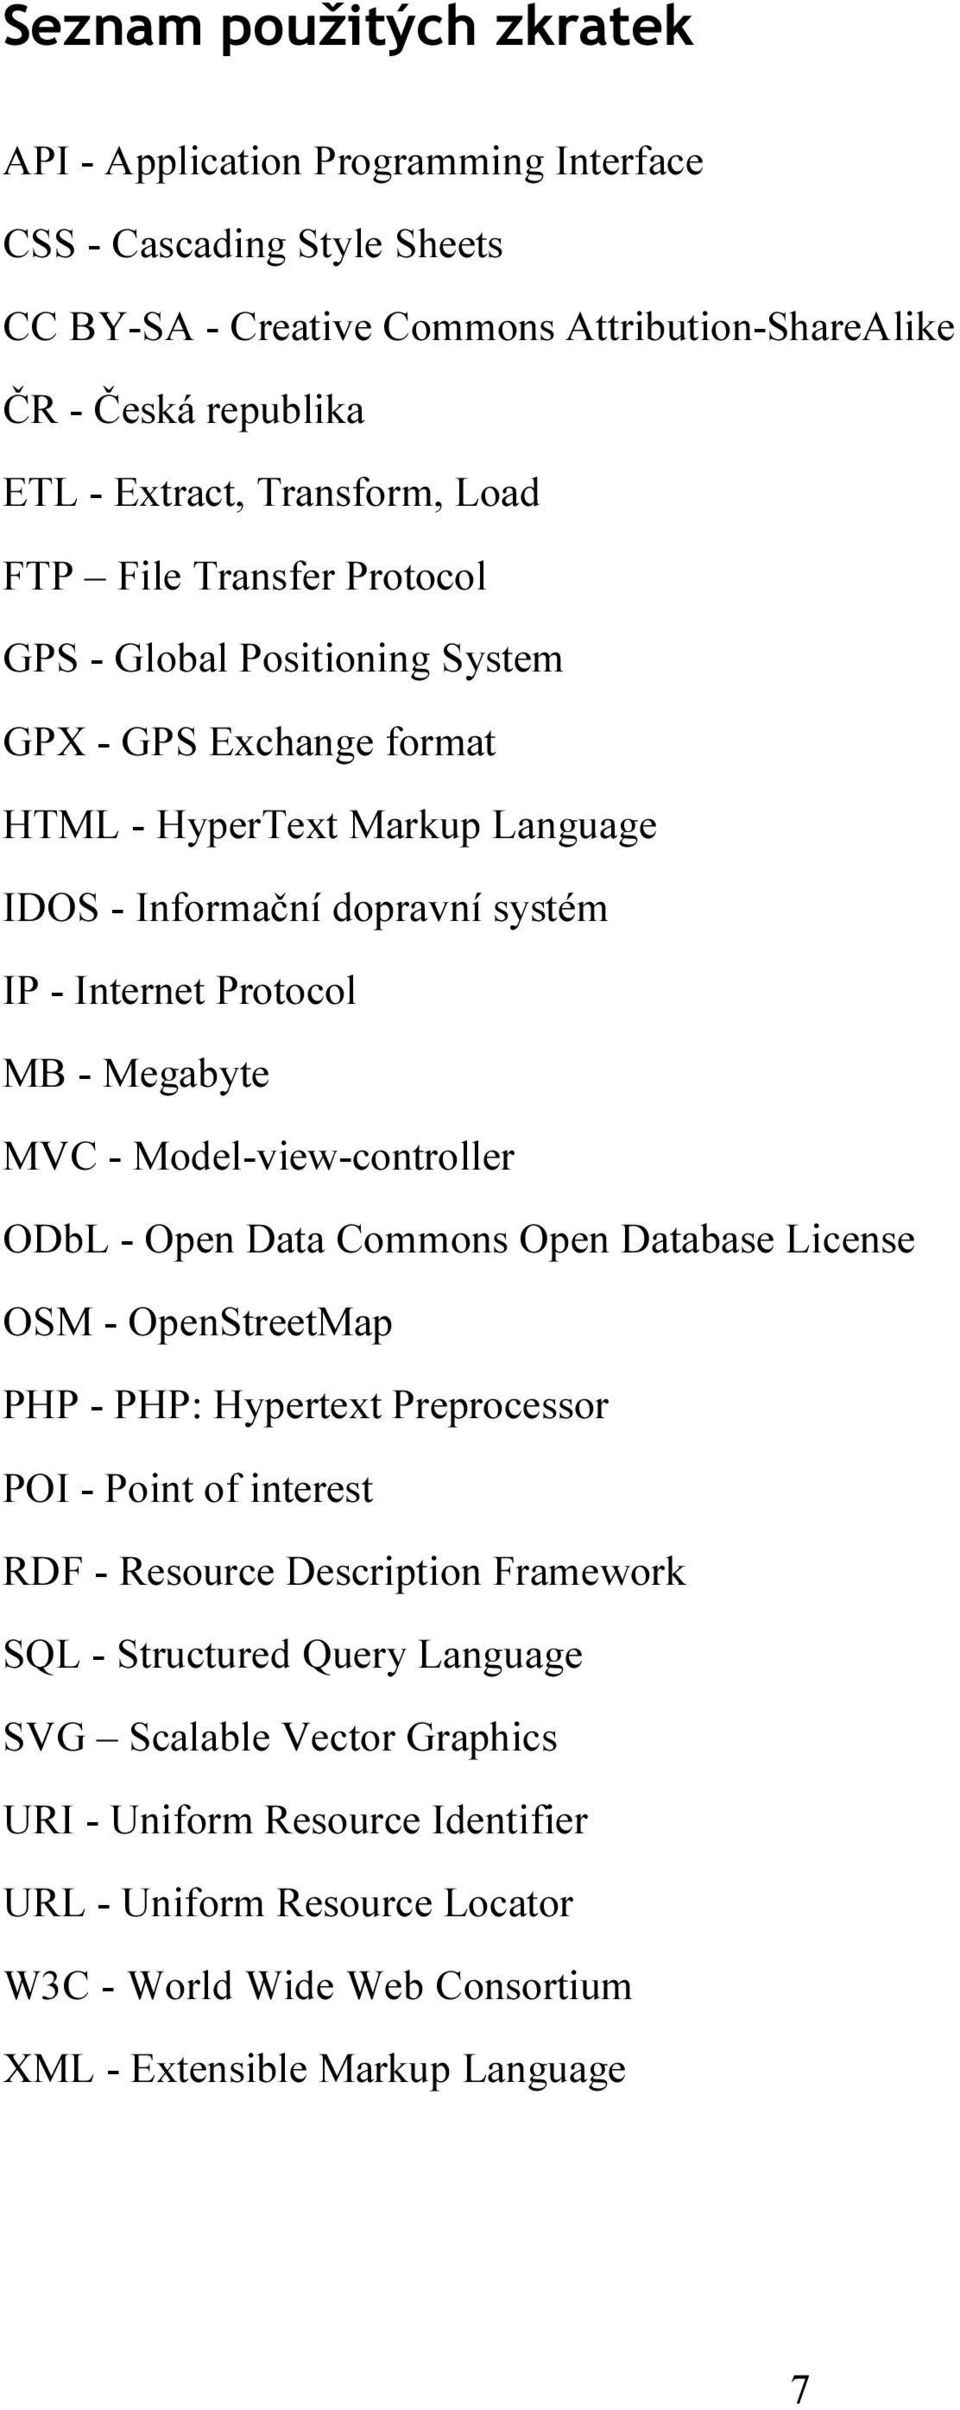 Megabyte MVC - Model-view-controller ODbL - Open Data Commons Open Database License OSM - OpenStreetMap PHP - PHP: Hypertext Preprocessor POI - Point of interest RDF - Resource Description